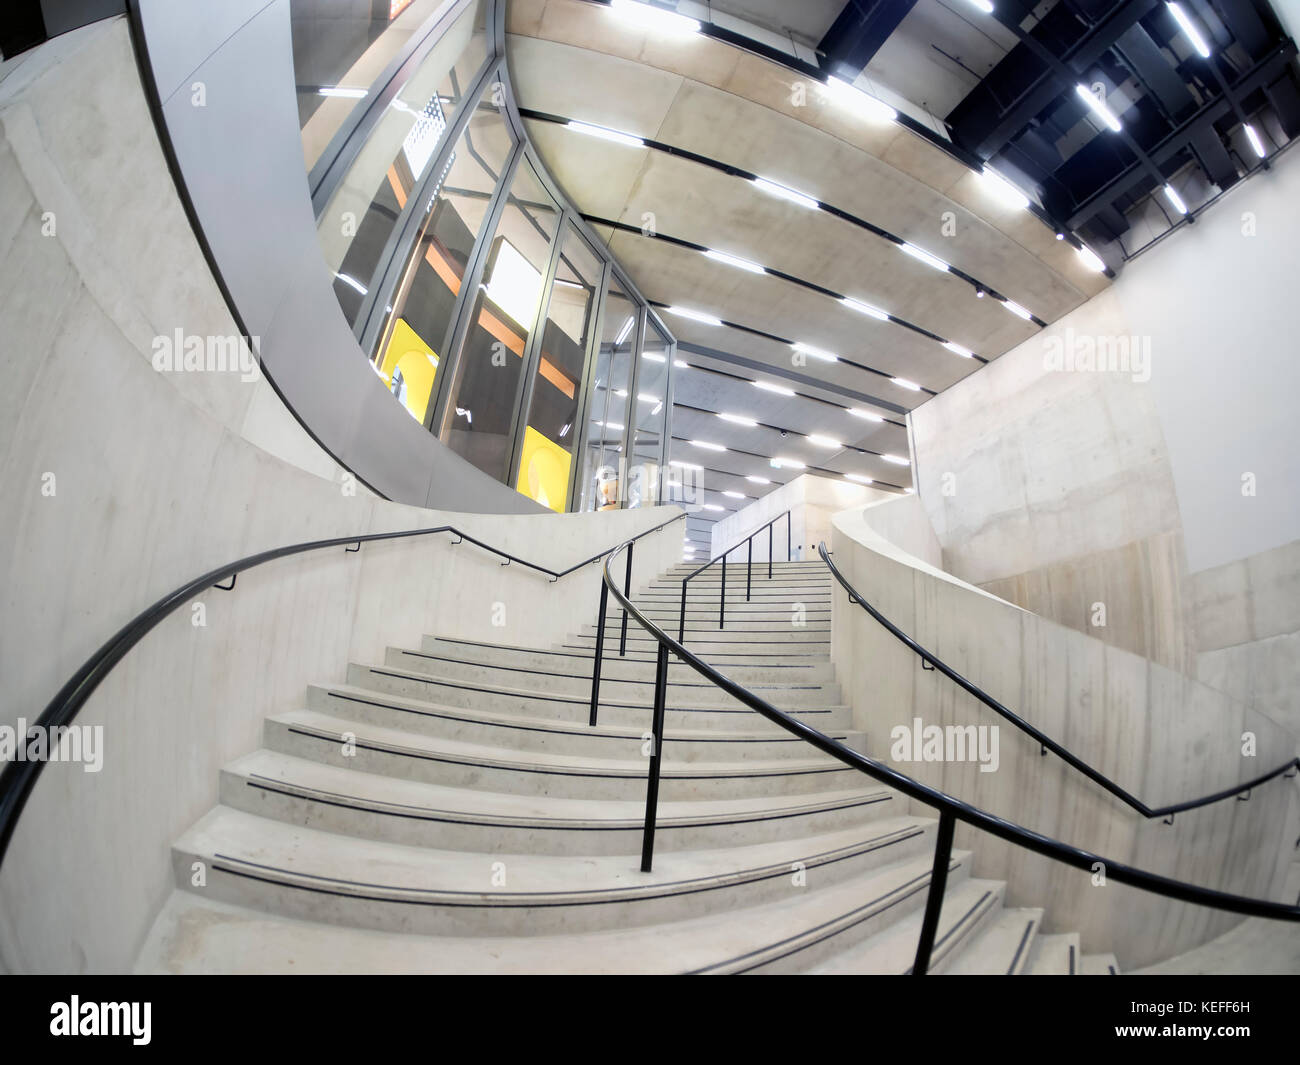 Fisheye view of a spiral staircase Stock Photo